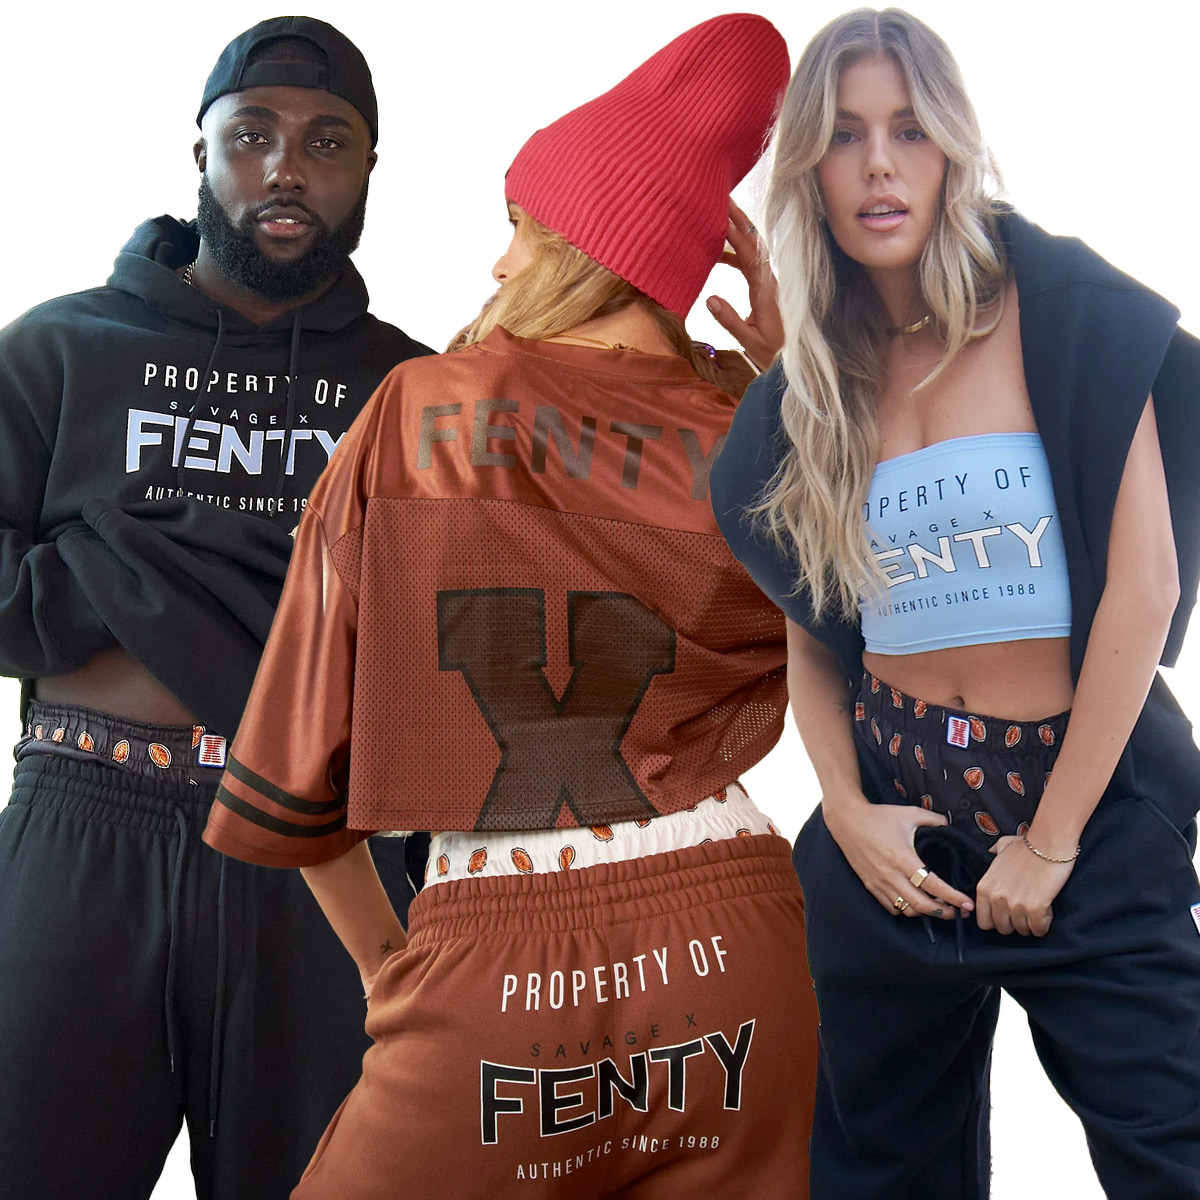 https://akns-images.eonline.com/eol_images/Entire_Site/2023011/rs_1200x1200-230111112501-1200-savage-fenty-game-day.jpg?fit=around%7C1200:1200&output-quality=90&crop=1200:1200;center,top